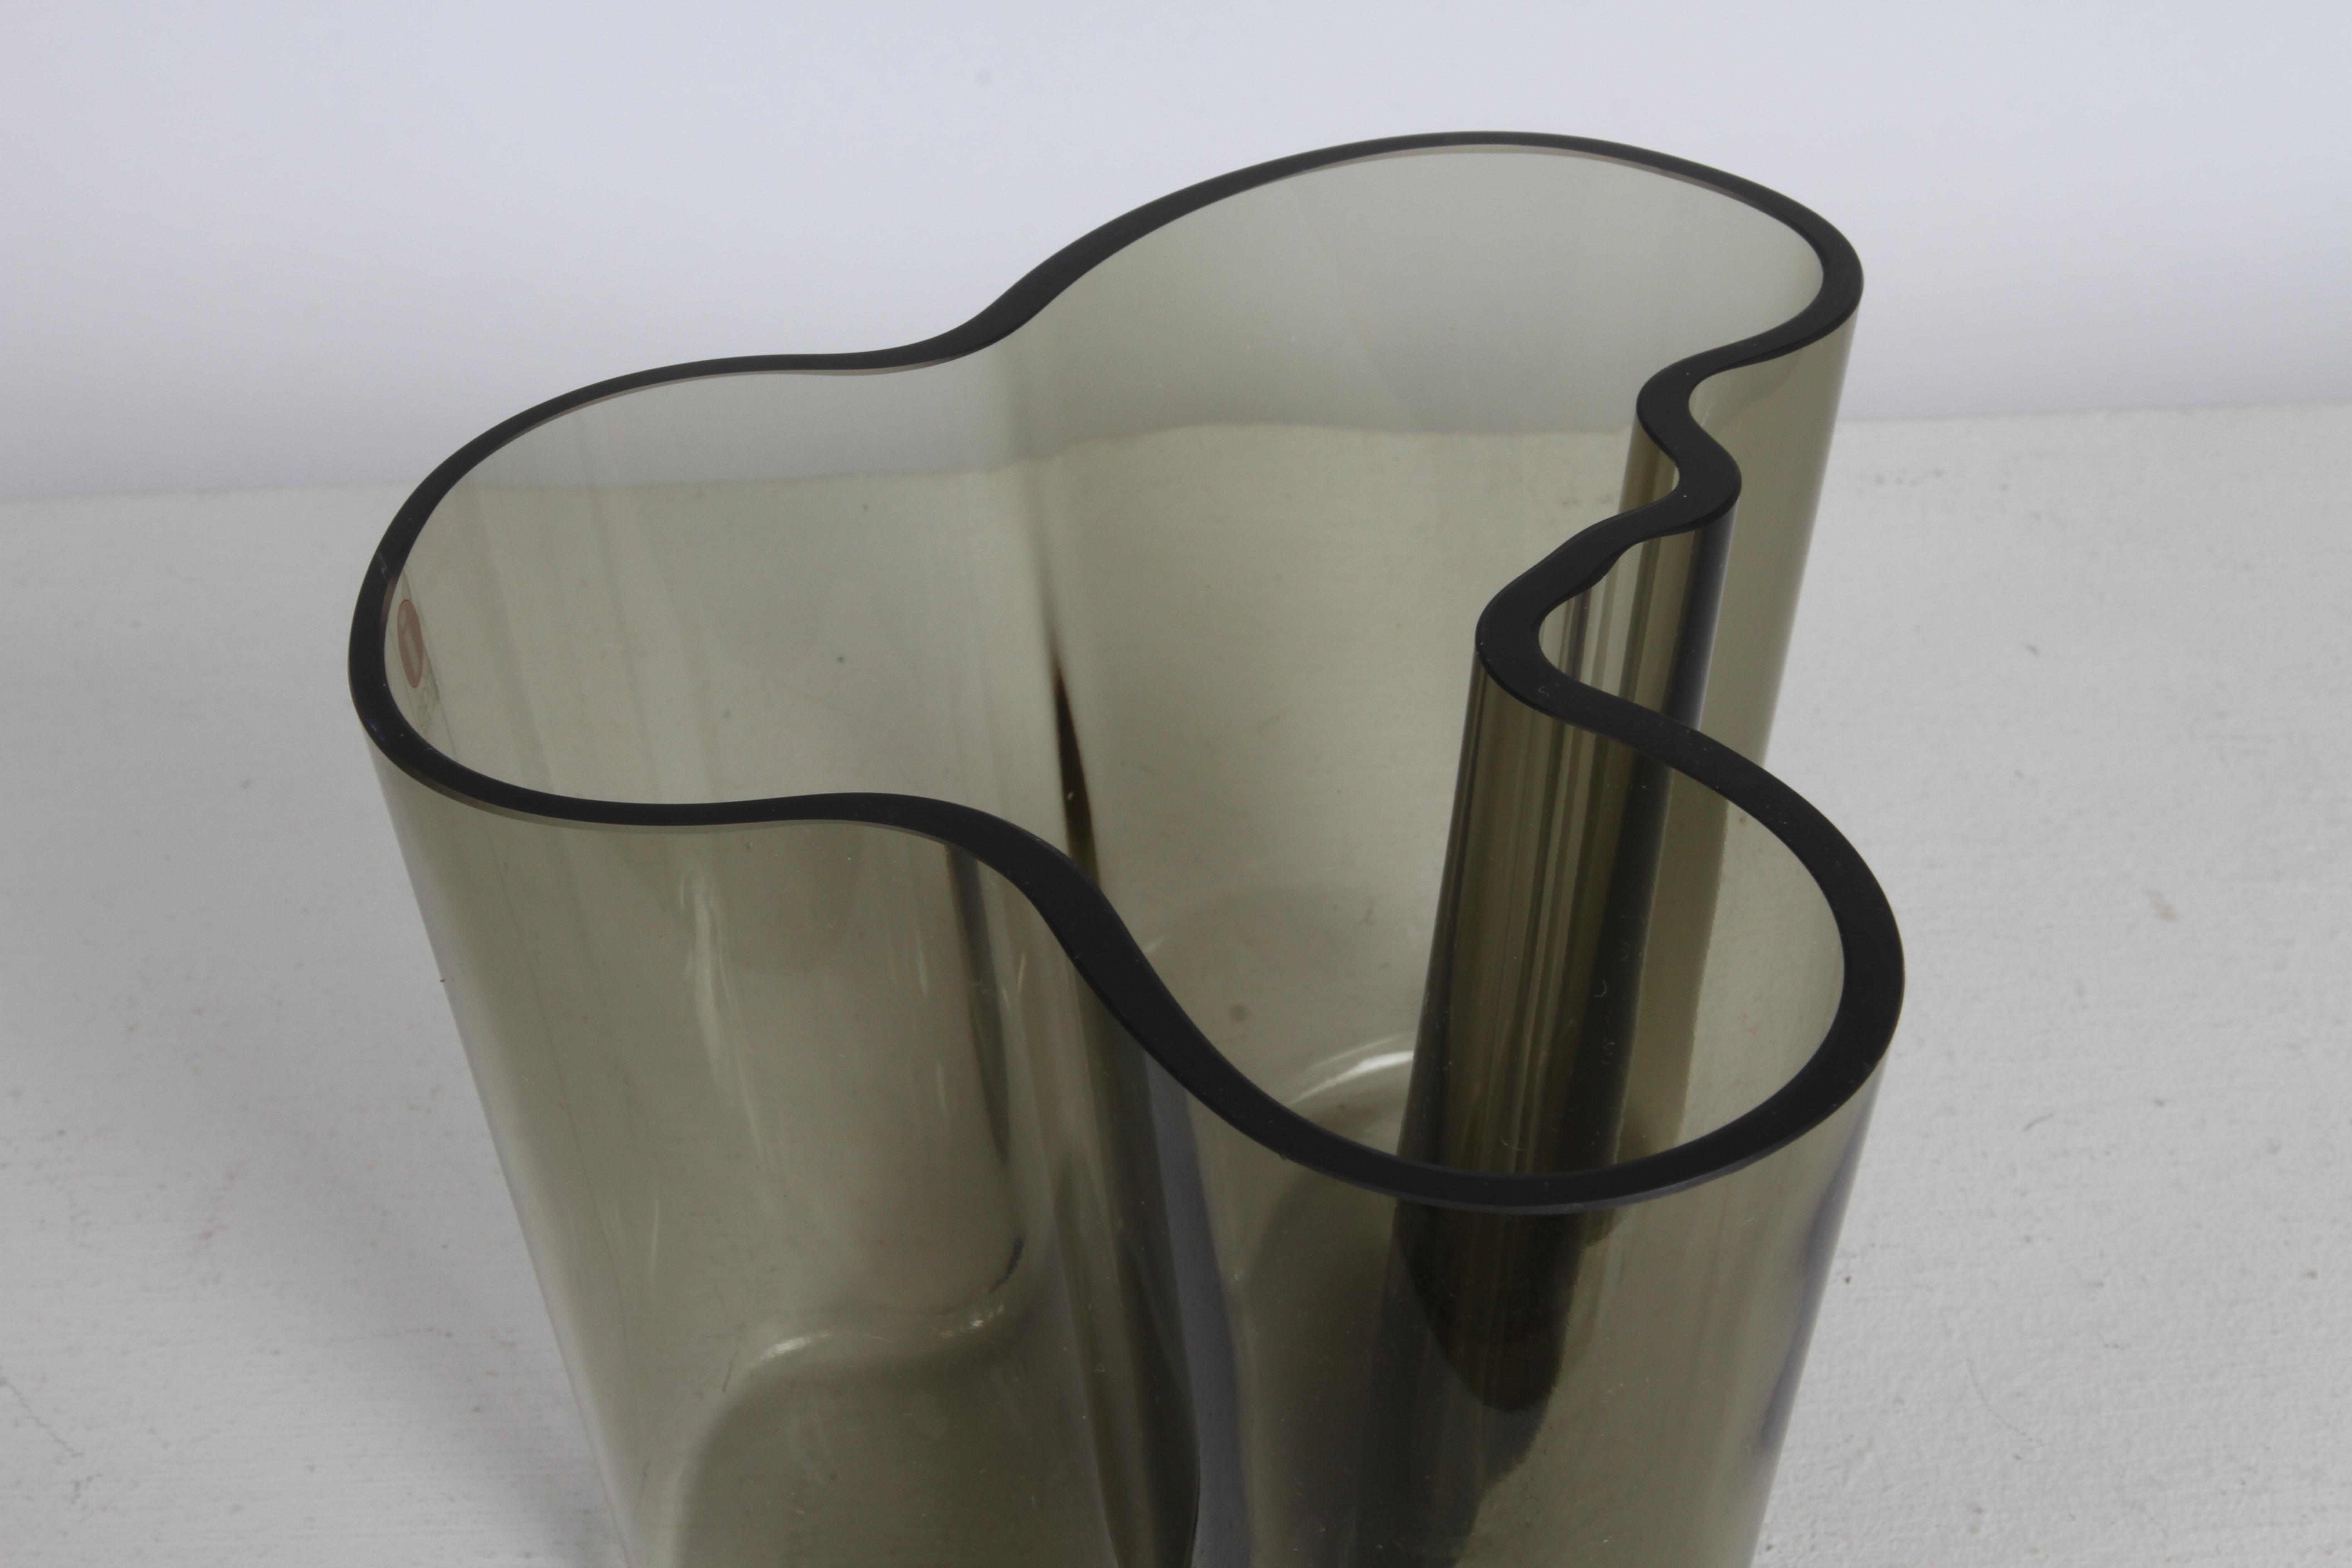 1970s MCM Alvar Aalto Savoy Vase 3030 in Smoke Gray Glass by Iittala Finland For Sale 6